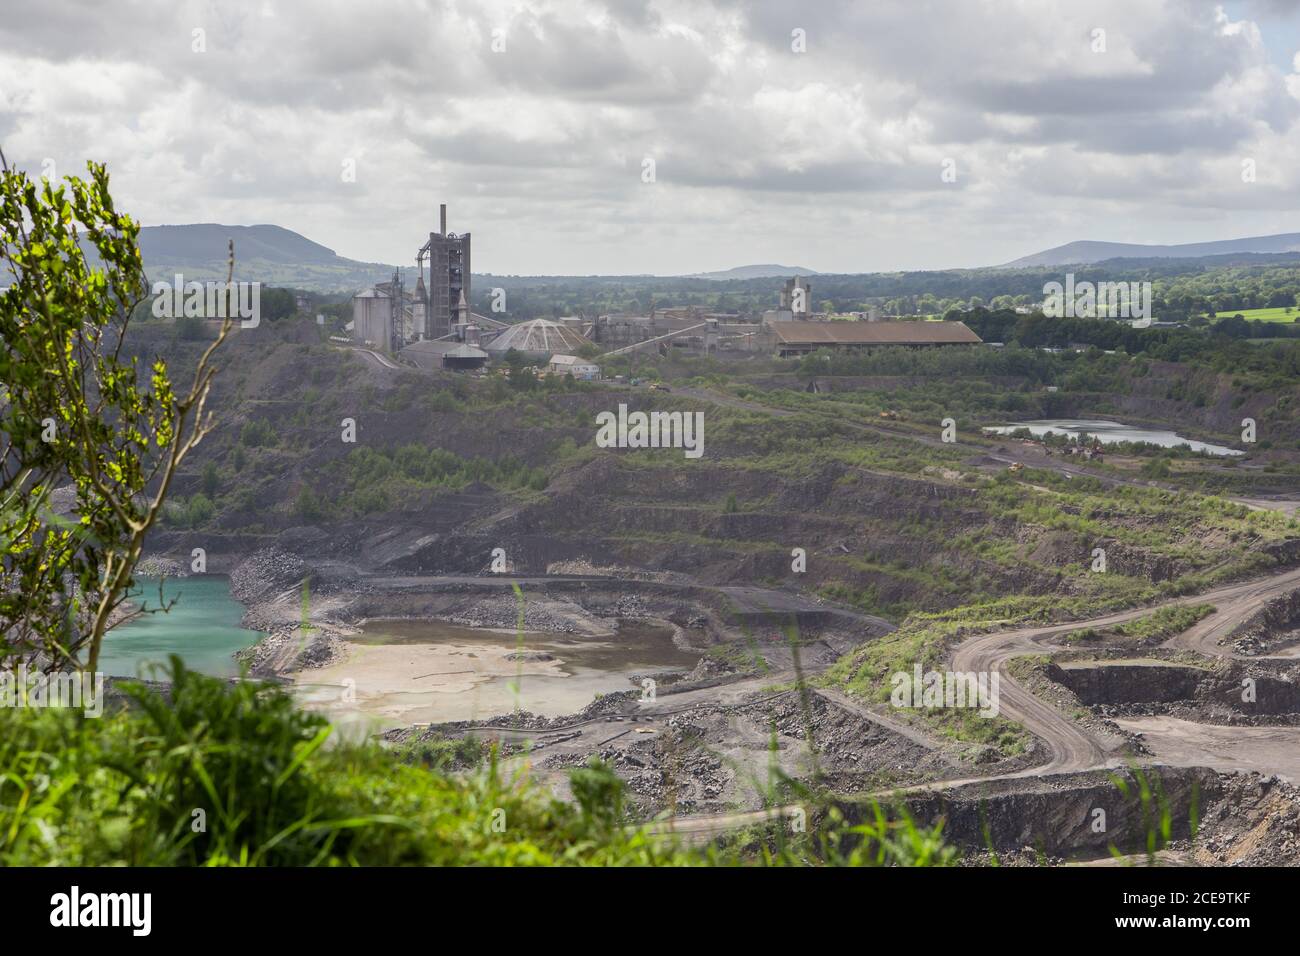 Large limestone quarry in Clitheroe, Ribble valley. Excavators and trucks working. Cement production Stock Photo